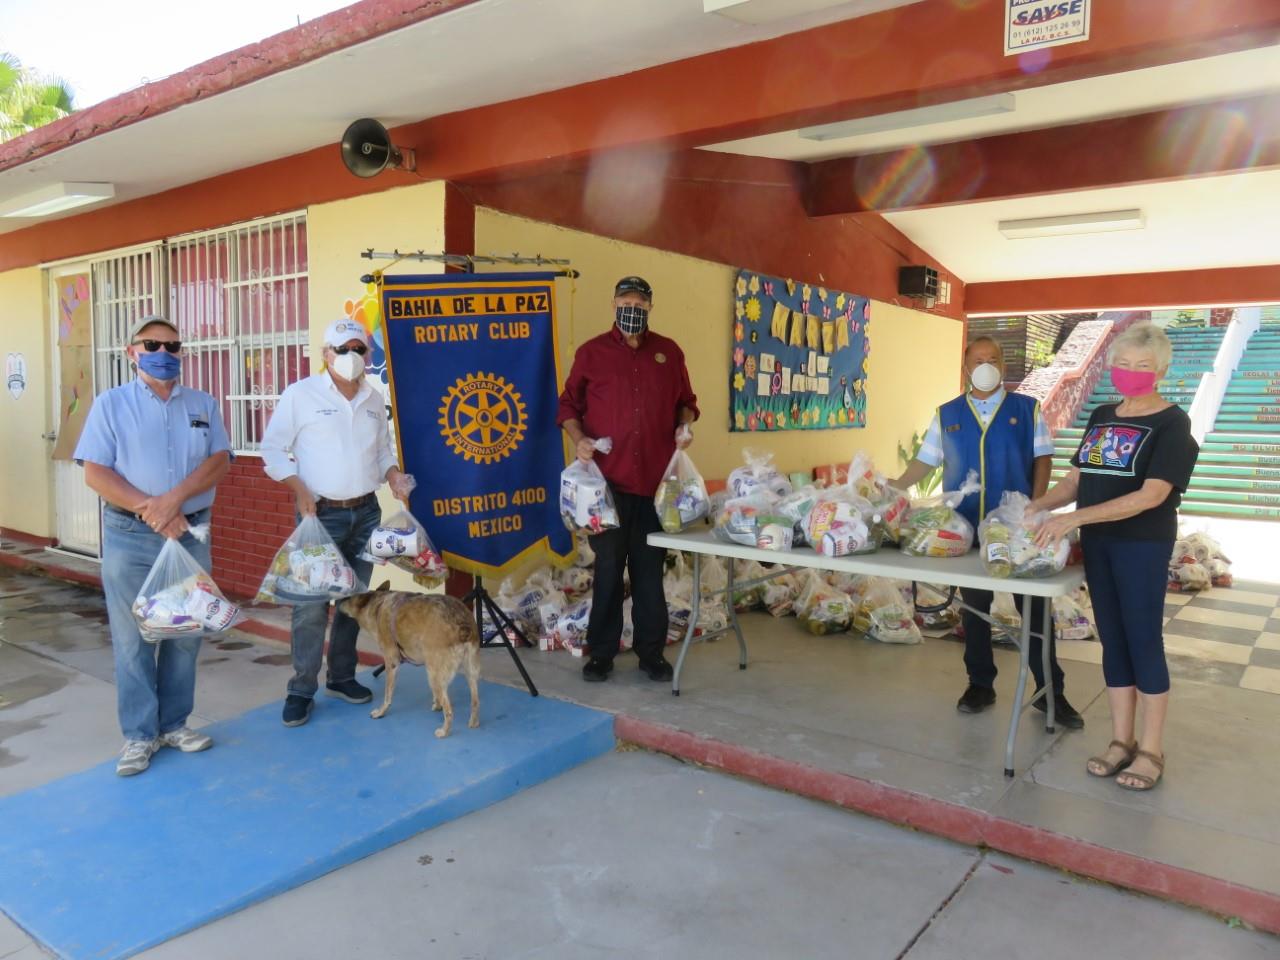 Rotary Club Donates Funds to Families in Need in Mexico | Rotary Club of  Redondo Beach